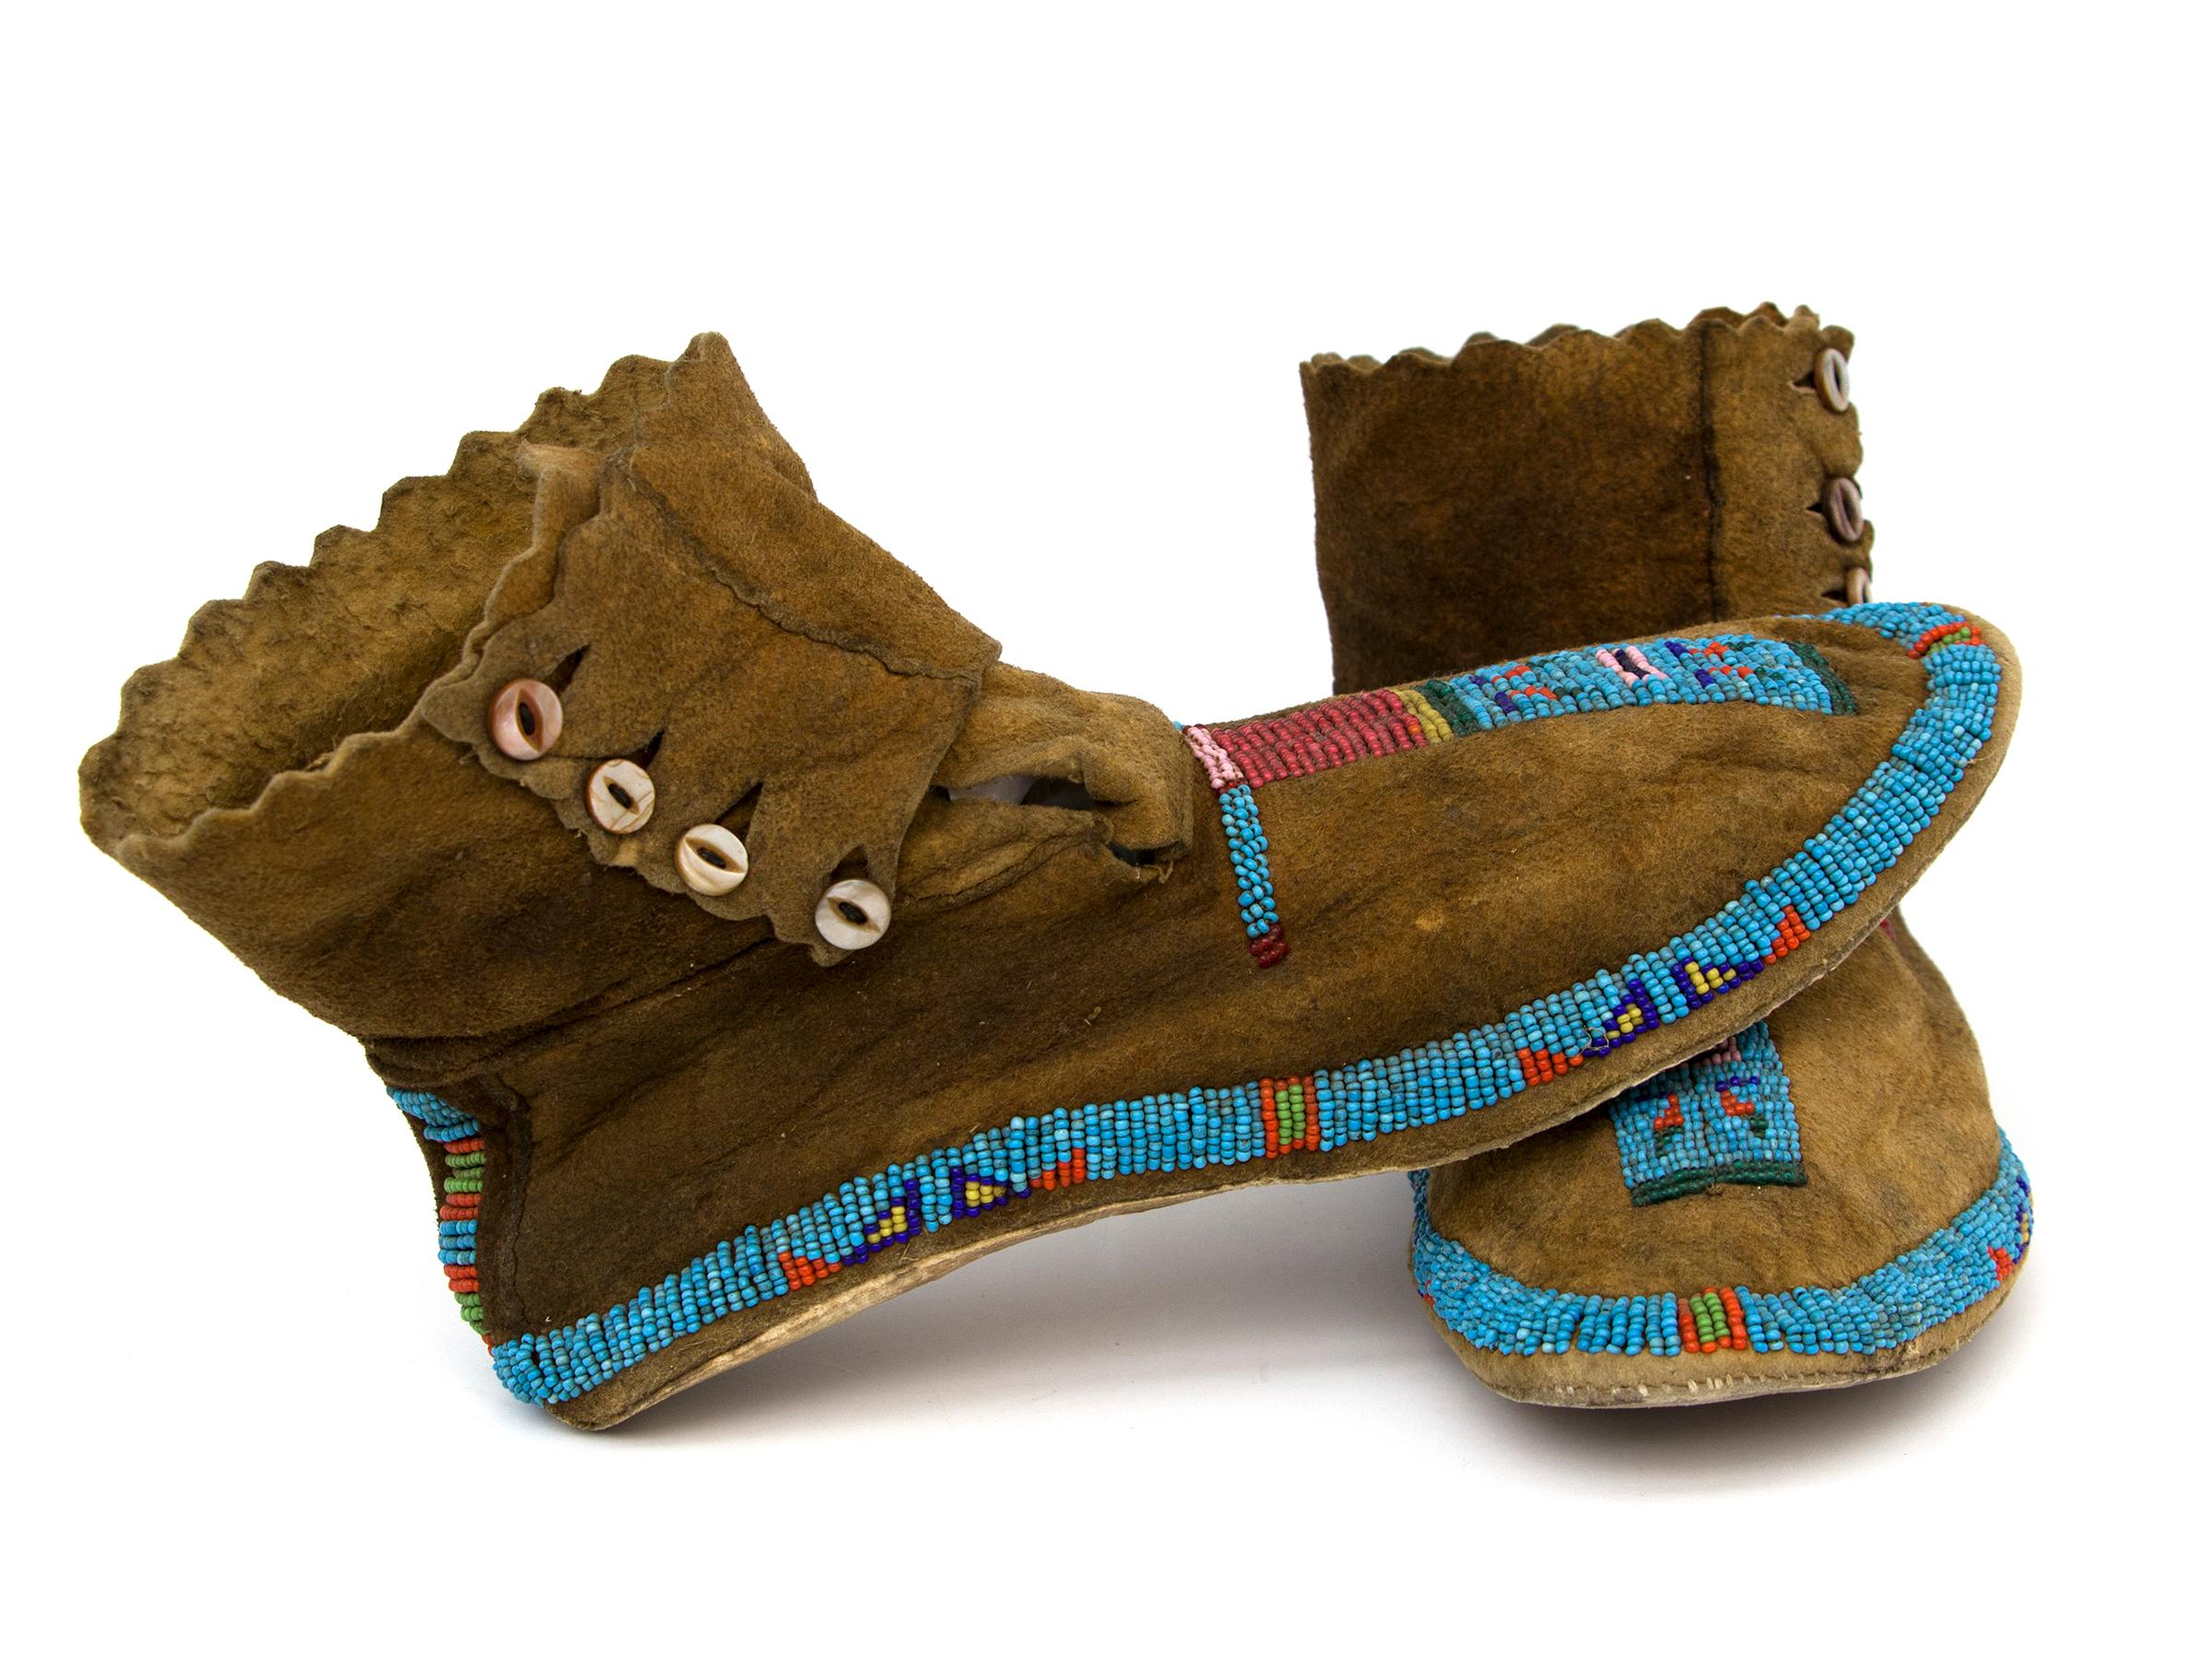 Pair of 19th century Blackfeet beaded hide Moccasins, vintage circa 1890 Native American/North American Indian. The hide is partially beaded in traditional designs with blue, red, yellow, green and pink trade beads. Cuff have a serrated edge and